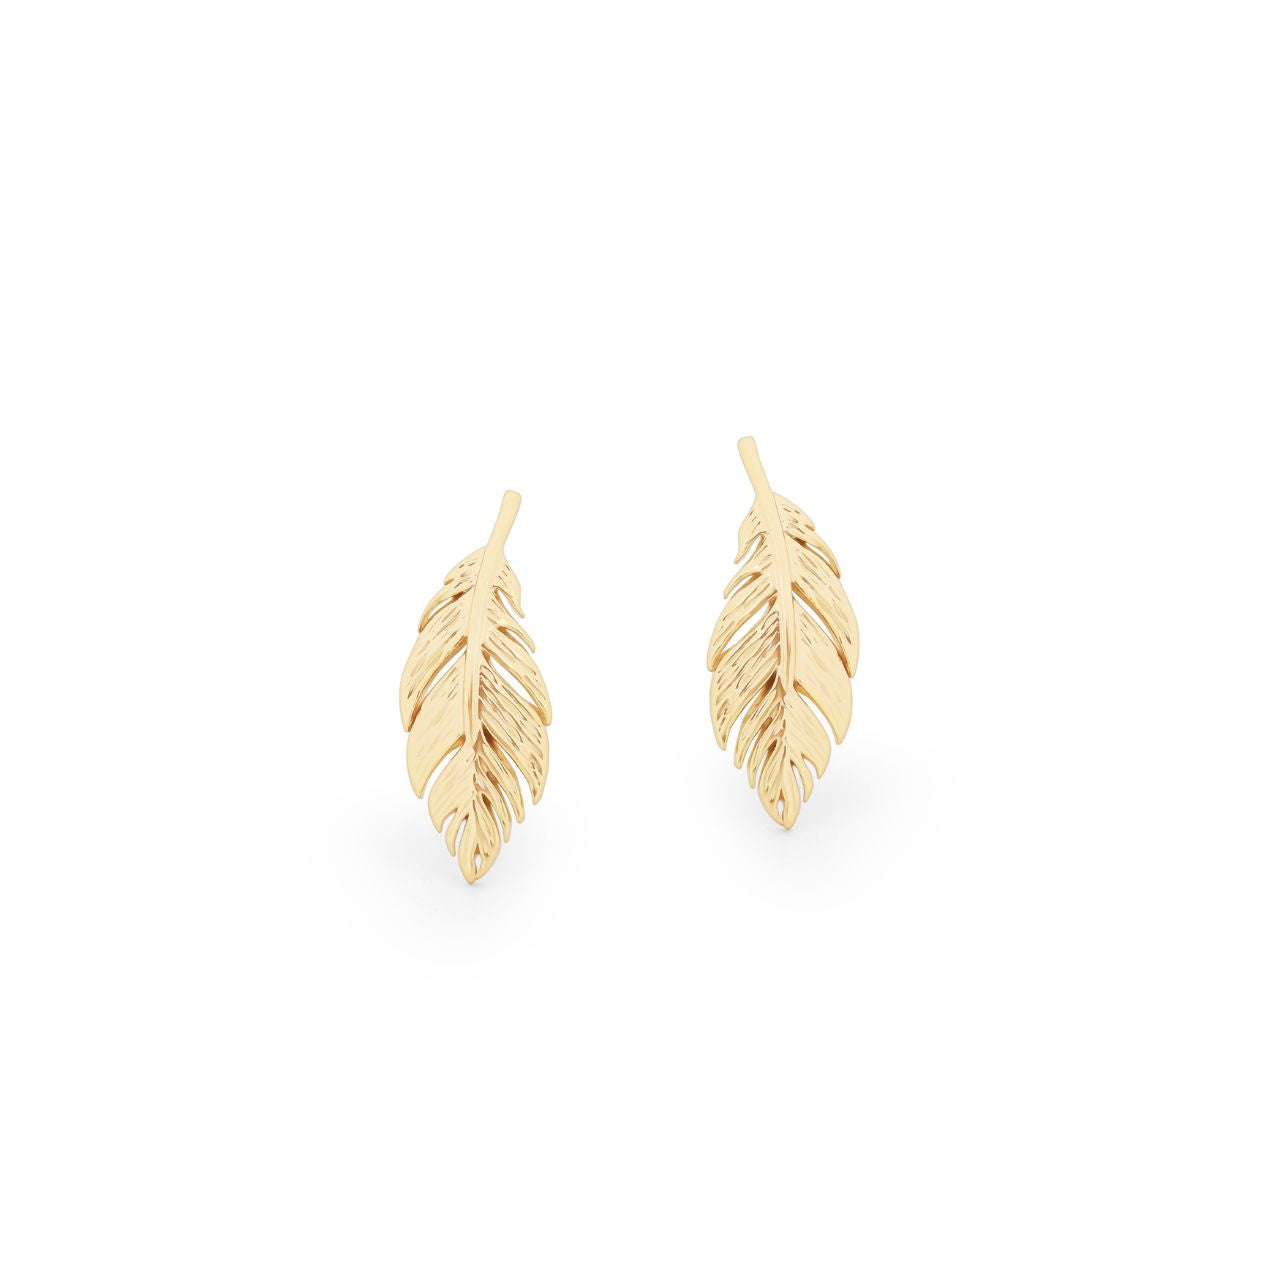 Feather Mini Gold Stud Earrings by Tipperary  The Tipperary Feather Mini Stud Earrings Gold are a stylish and understated addition to any wardrobe. These lovely earrings feature a gold finish, making them perfect for any occasion. Crafted from quality materials, these earrings are sure to last for years.